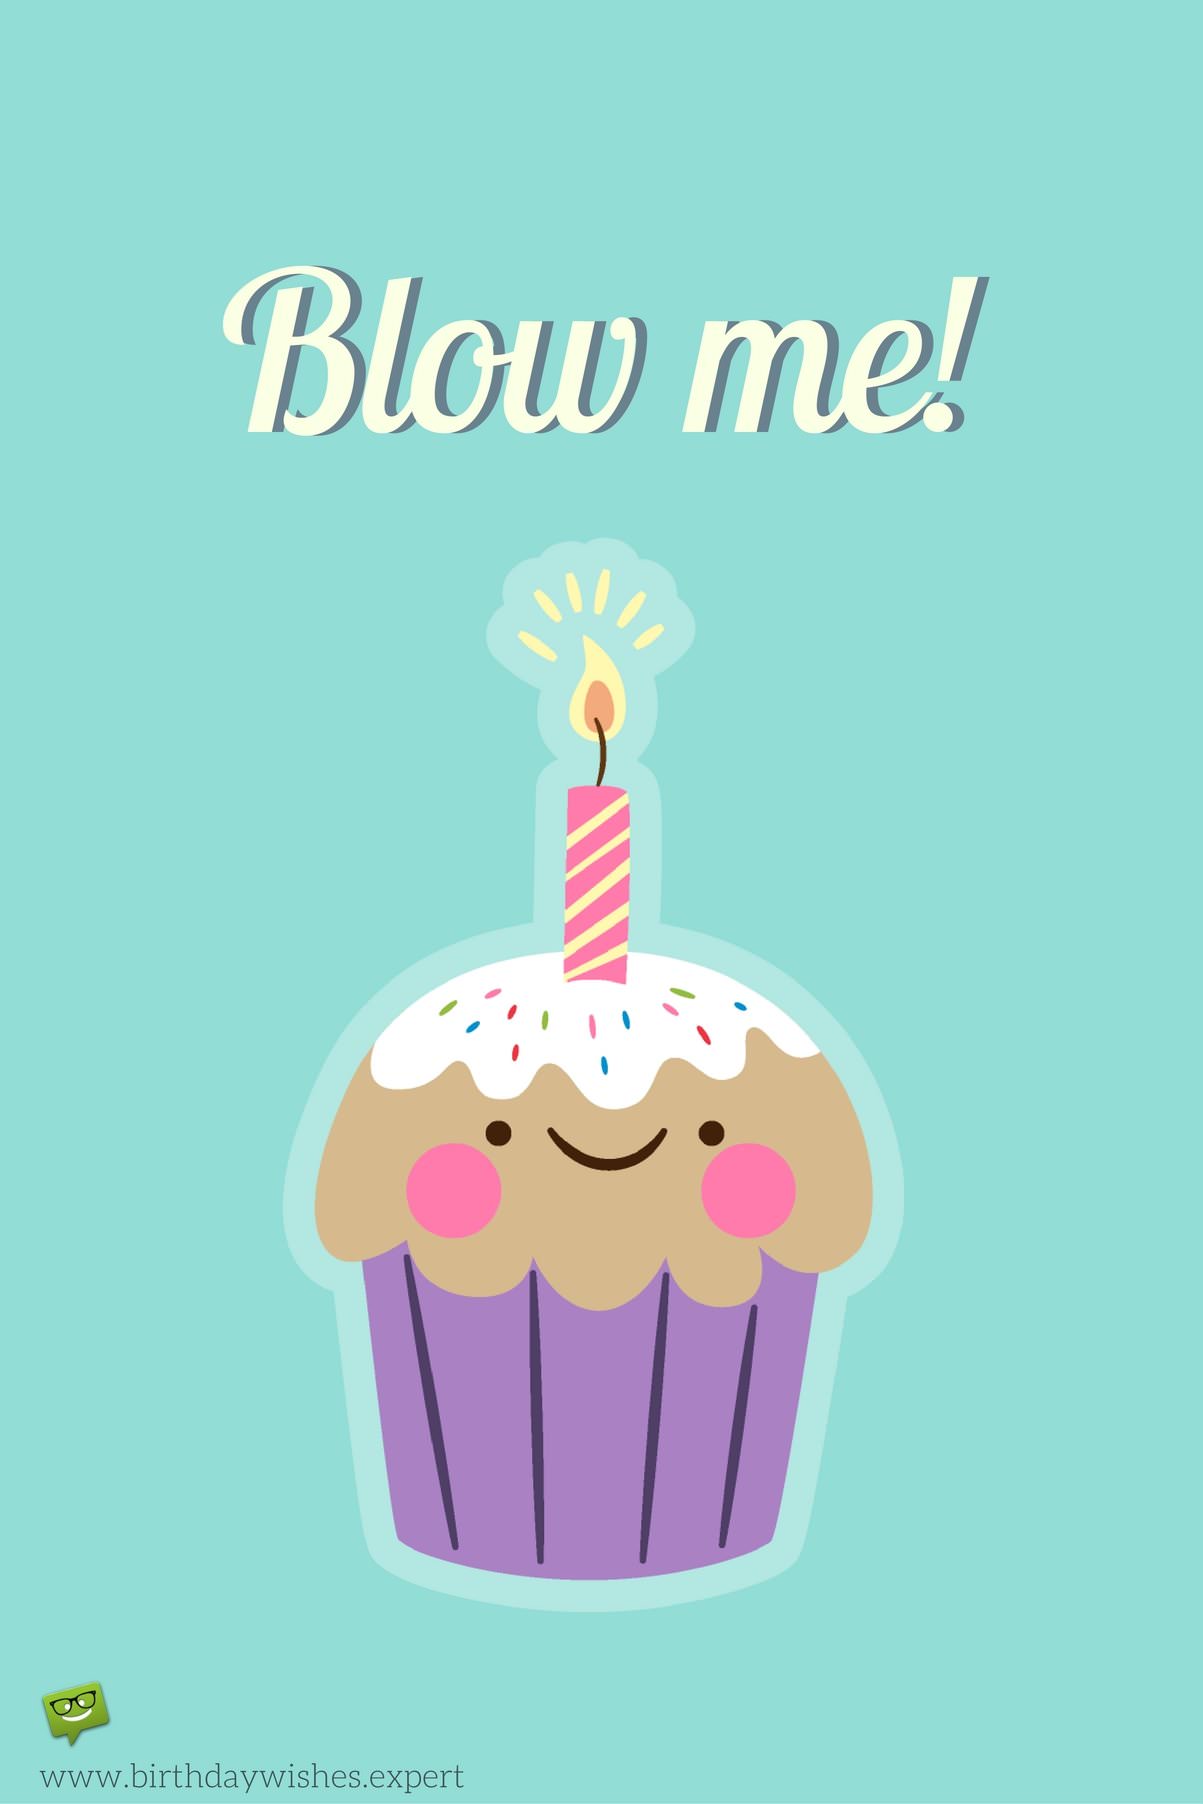 Funny Birthday Wishes for your Friends Your LOL Messages!